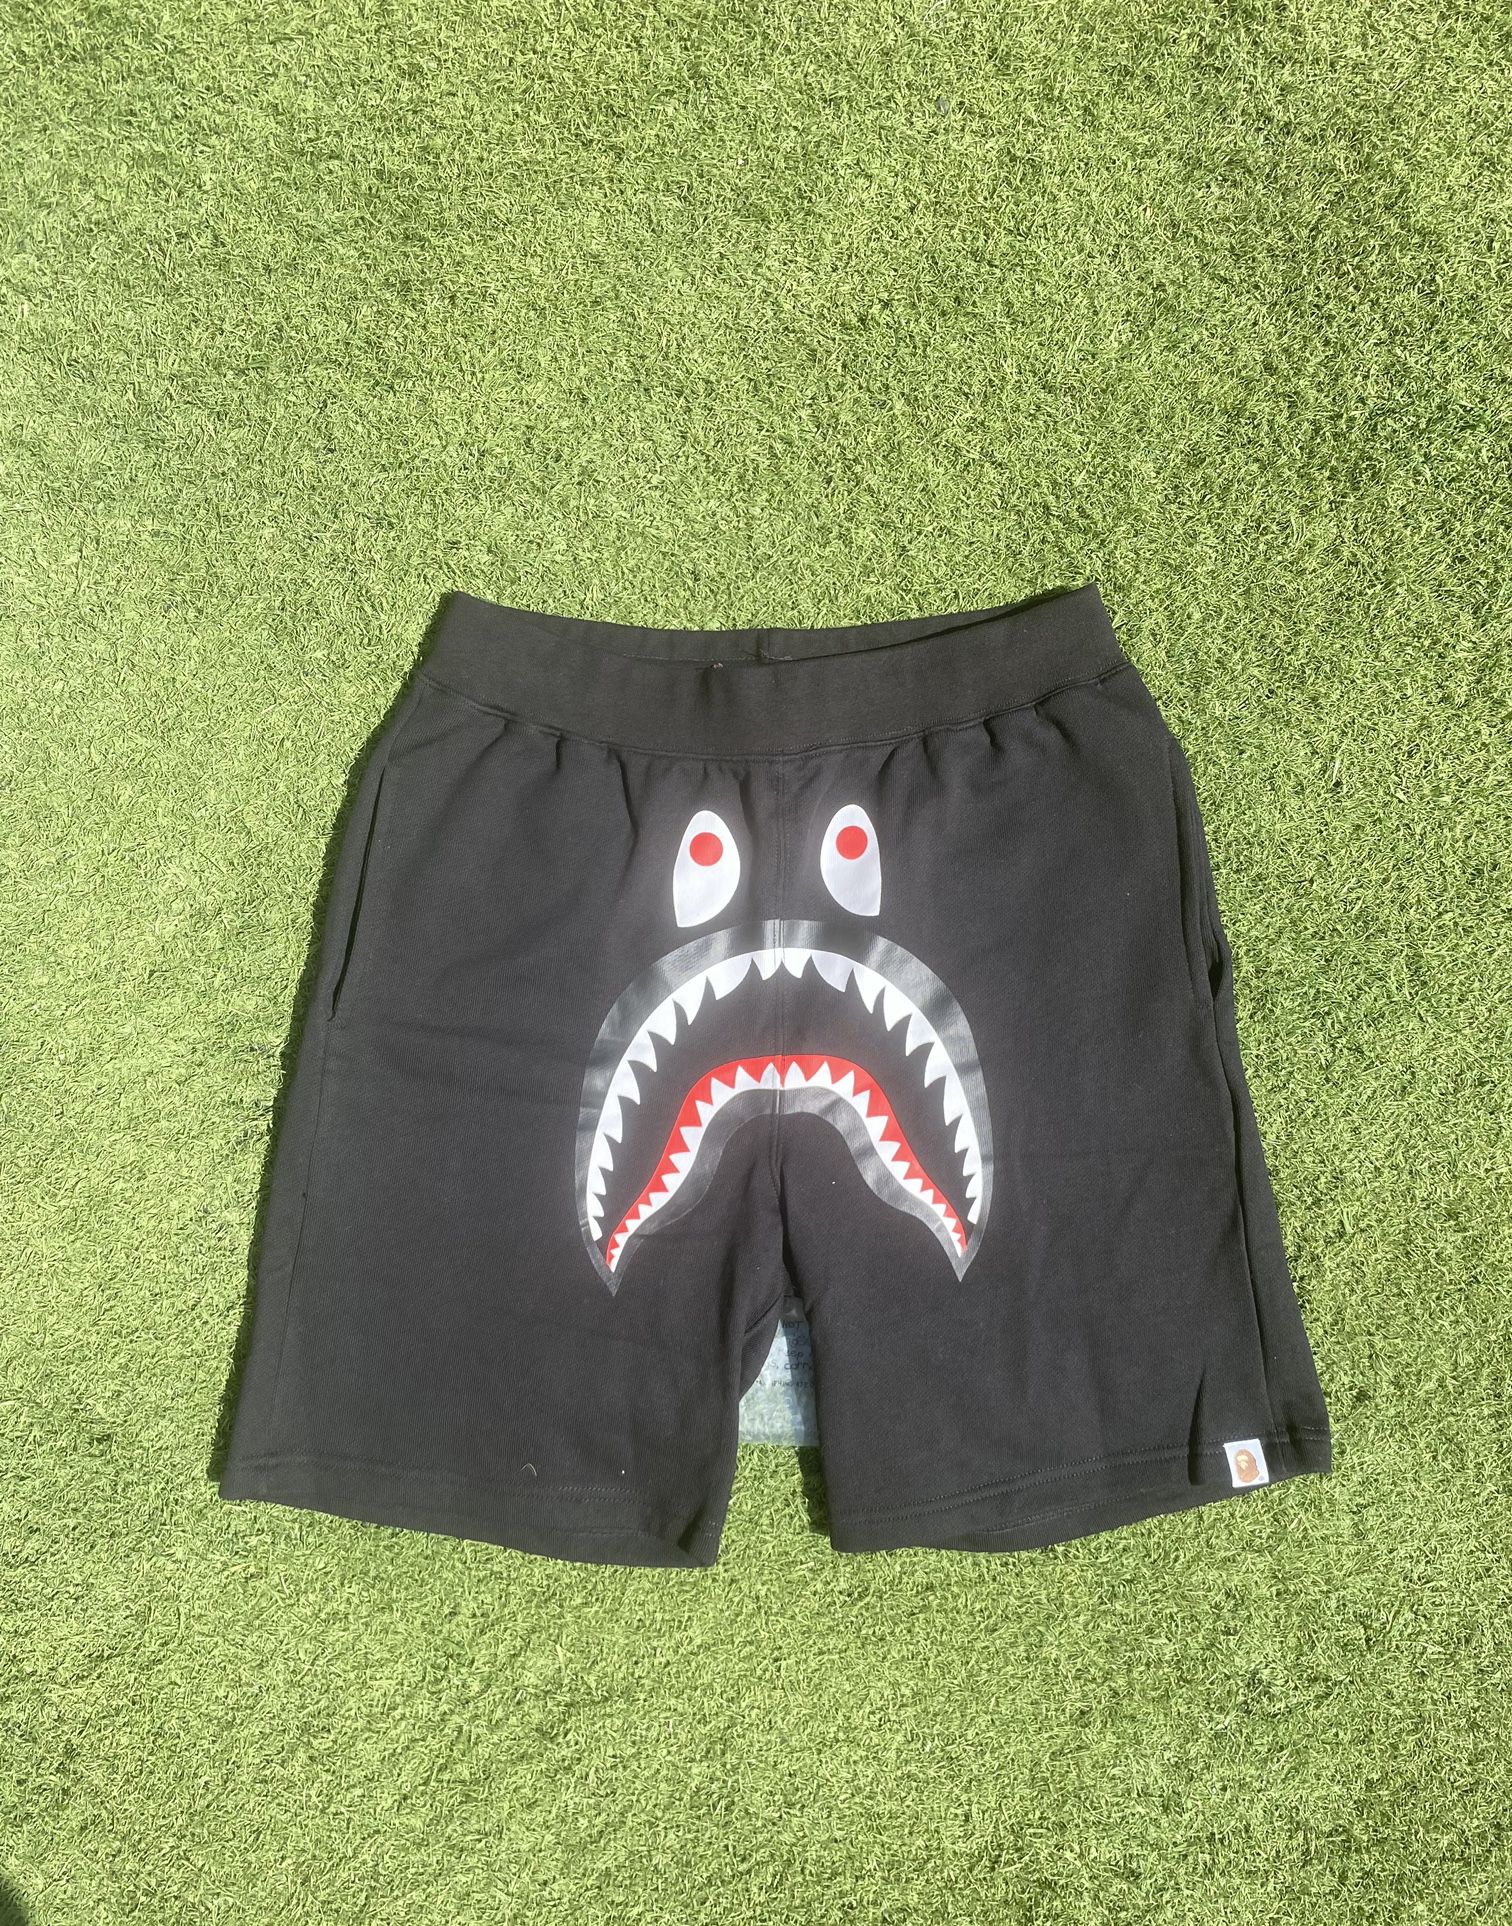 Brand New Bape Shorts (Small and Large)